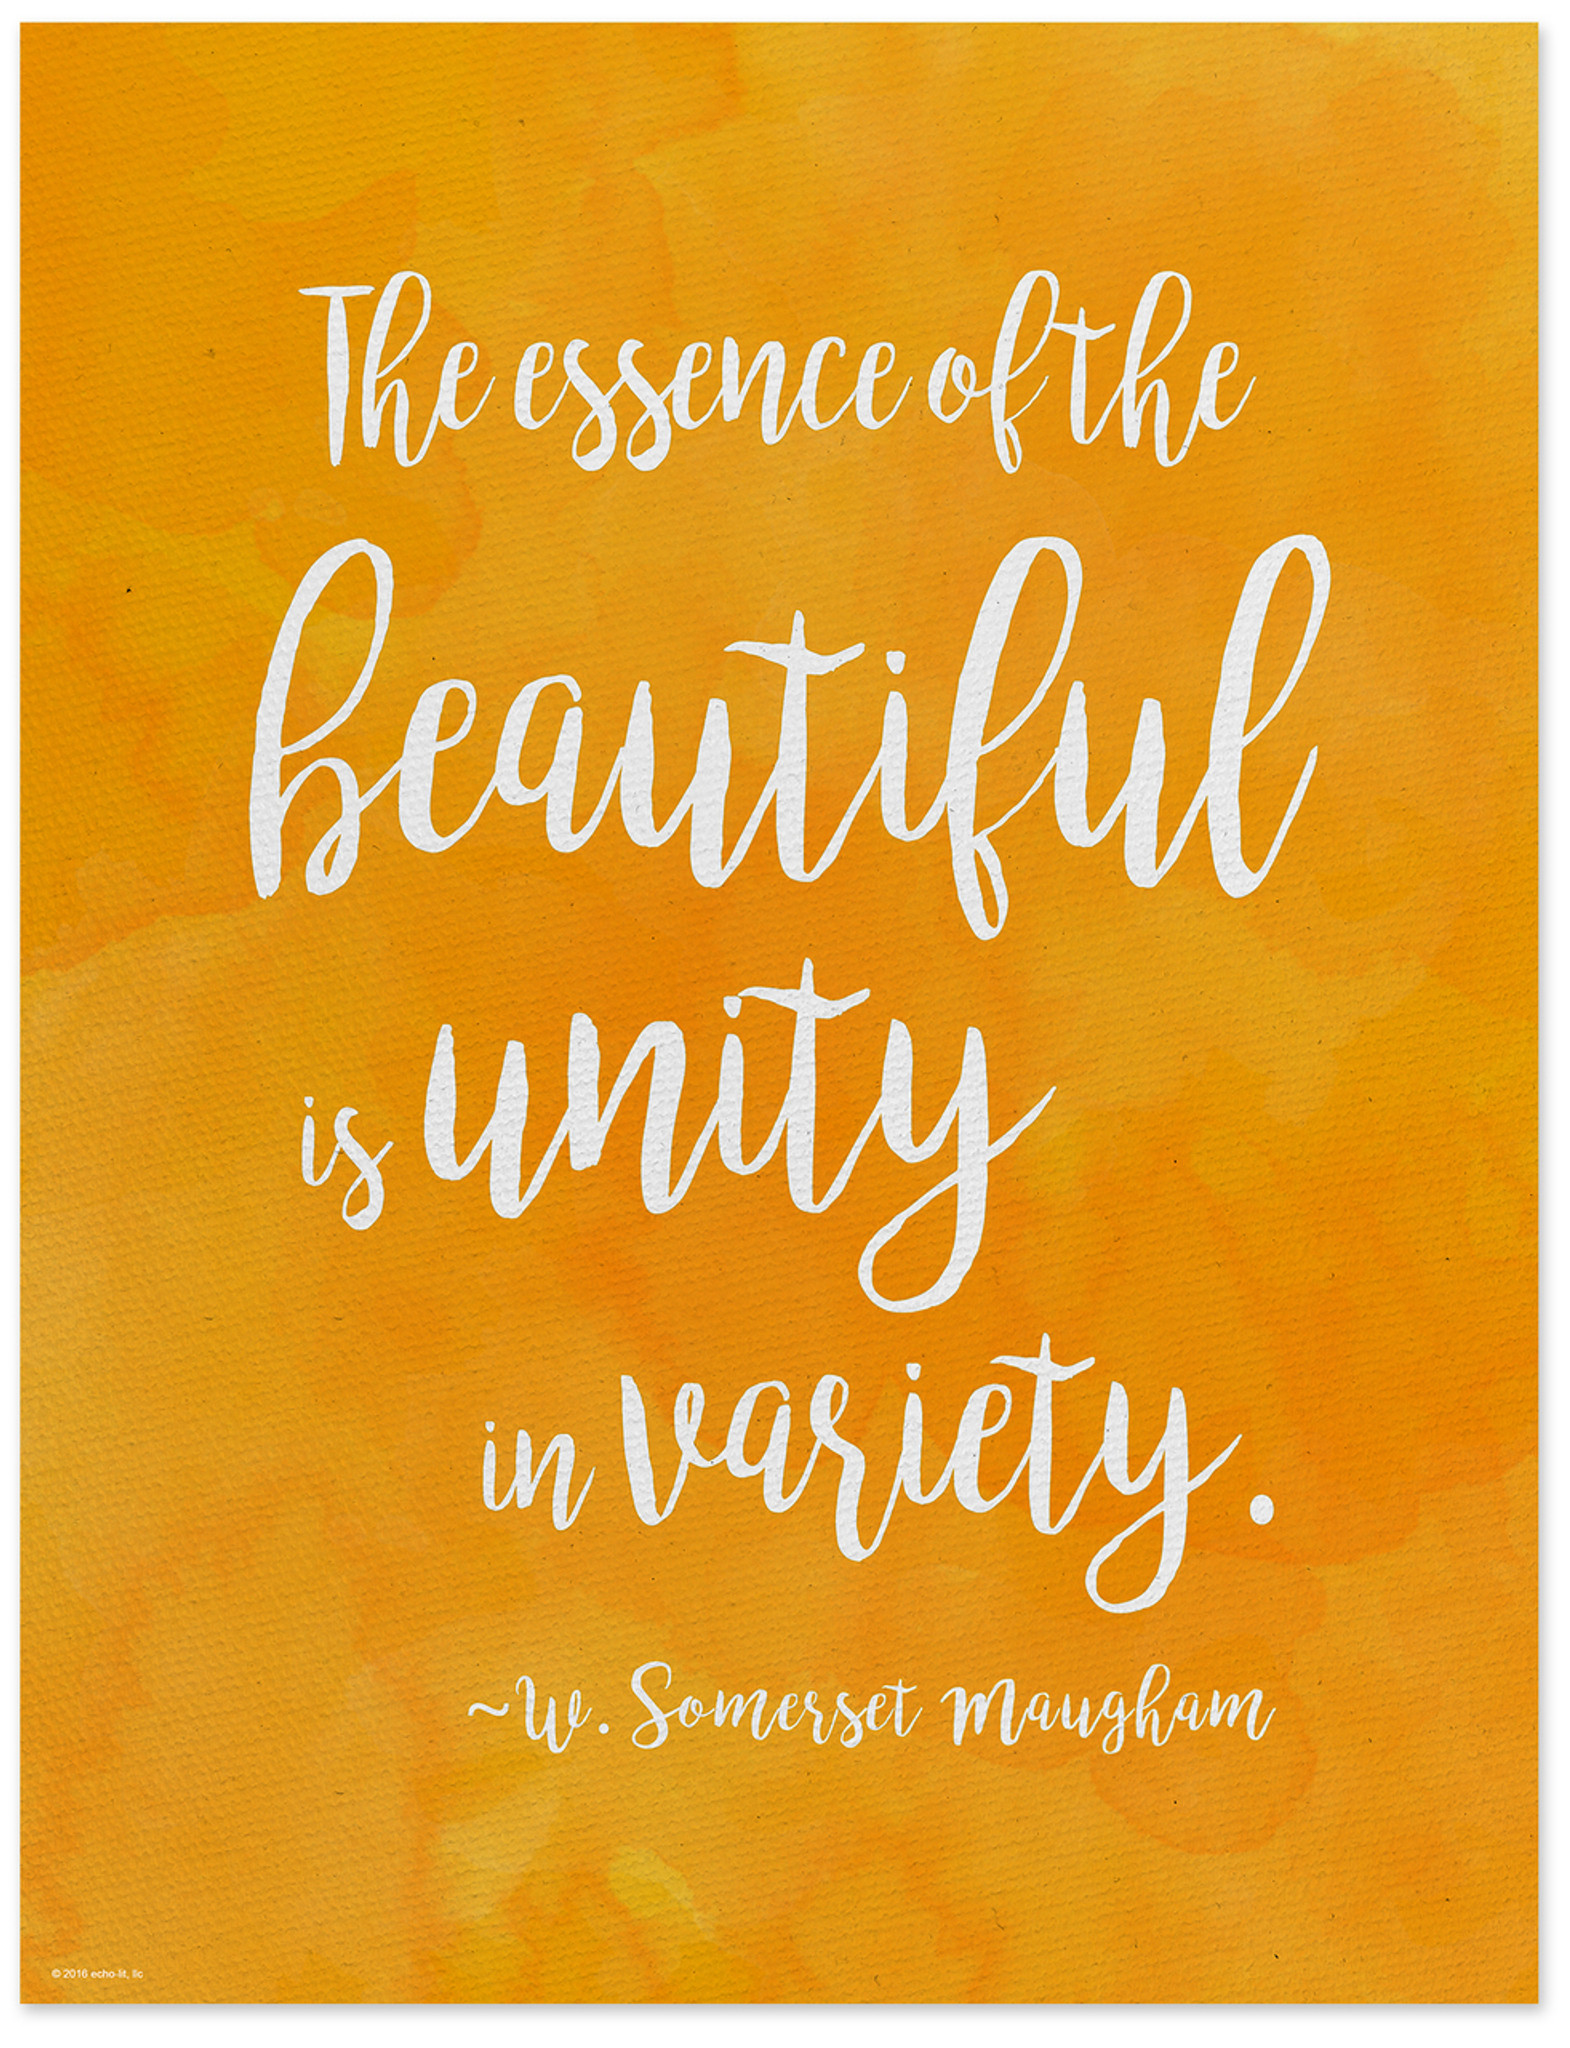 Unity in Variety - W. Somerset Maugham Diversity Quote Poster. Fine Art